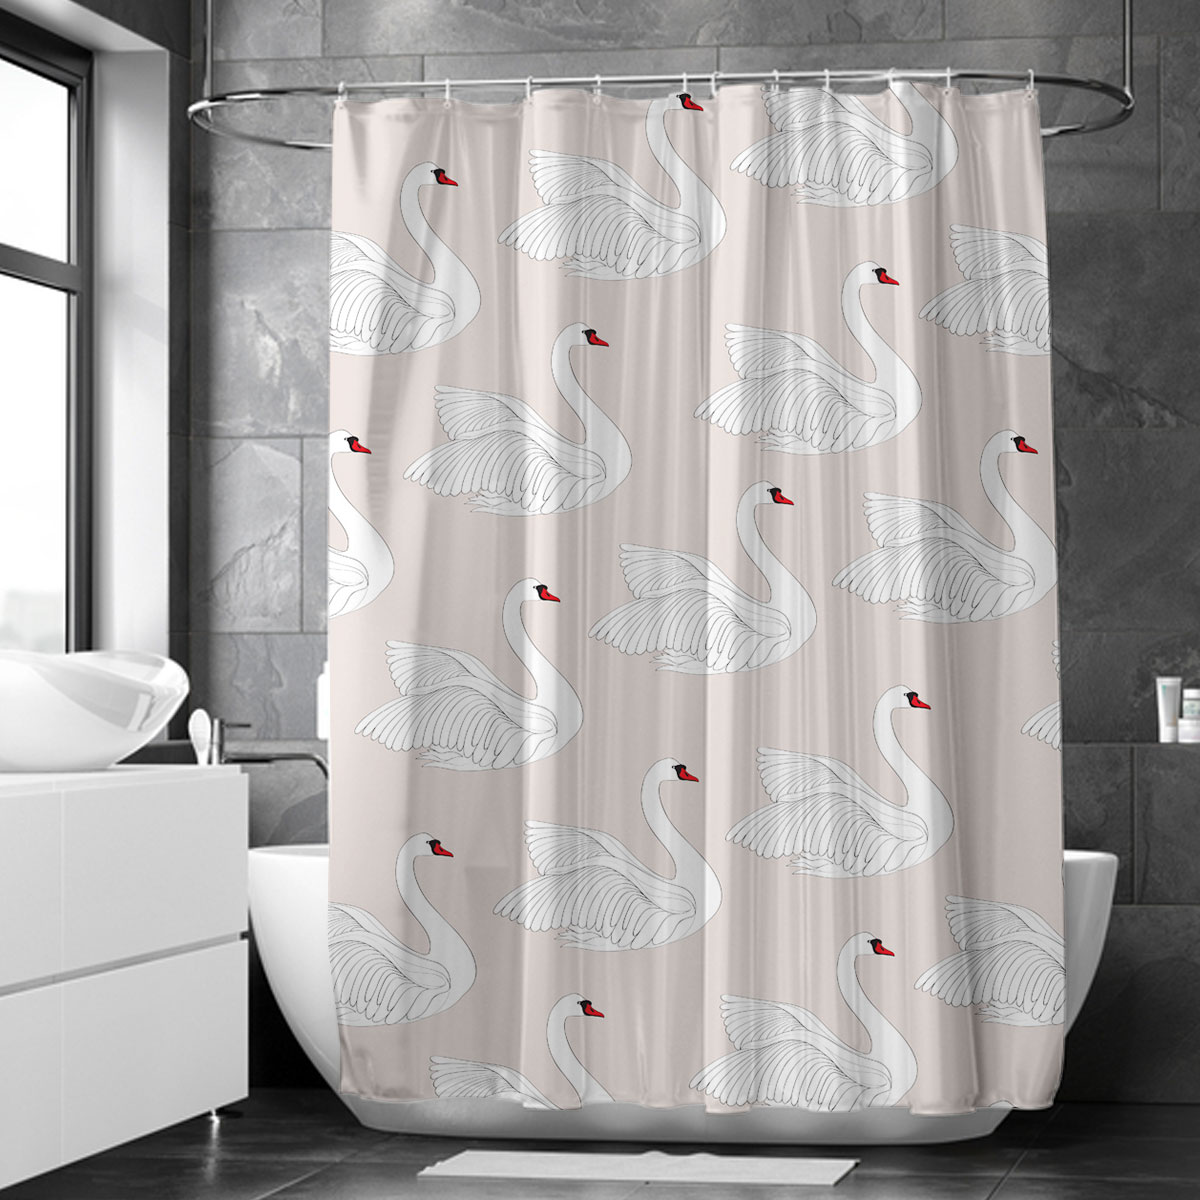 Iconic White Swan Shower Curtain